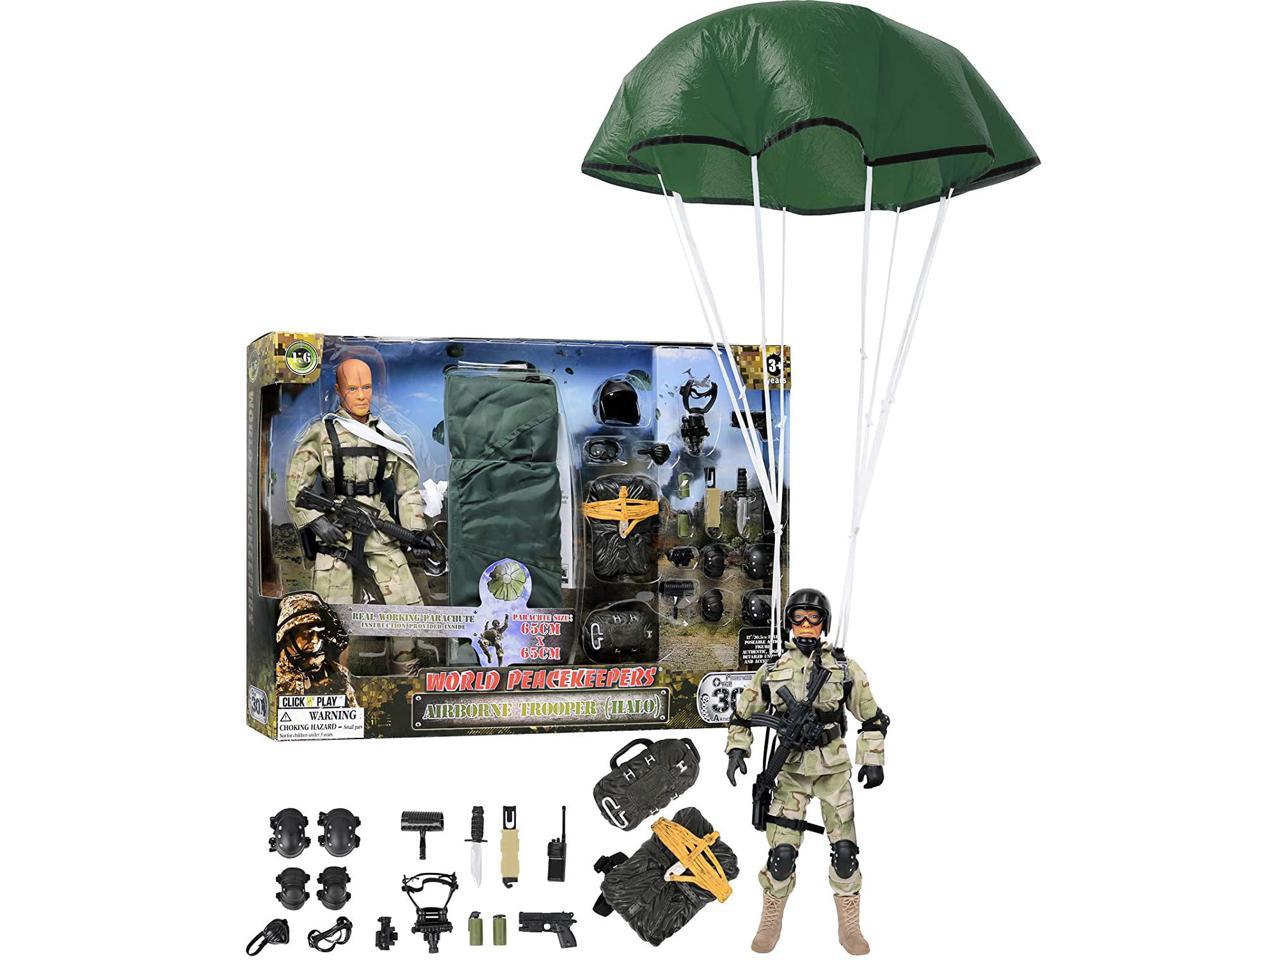 Pack of 5 3.5" Paratroopers Action Figure with Parachute Army Soldiers Toy 